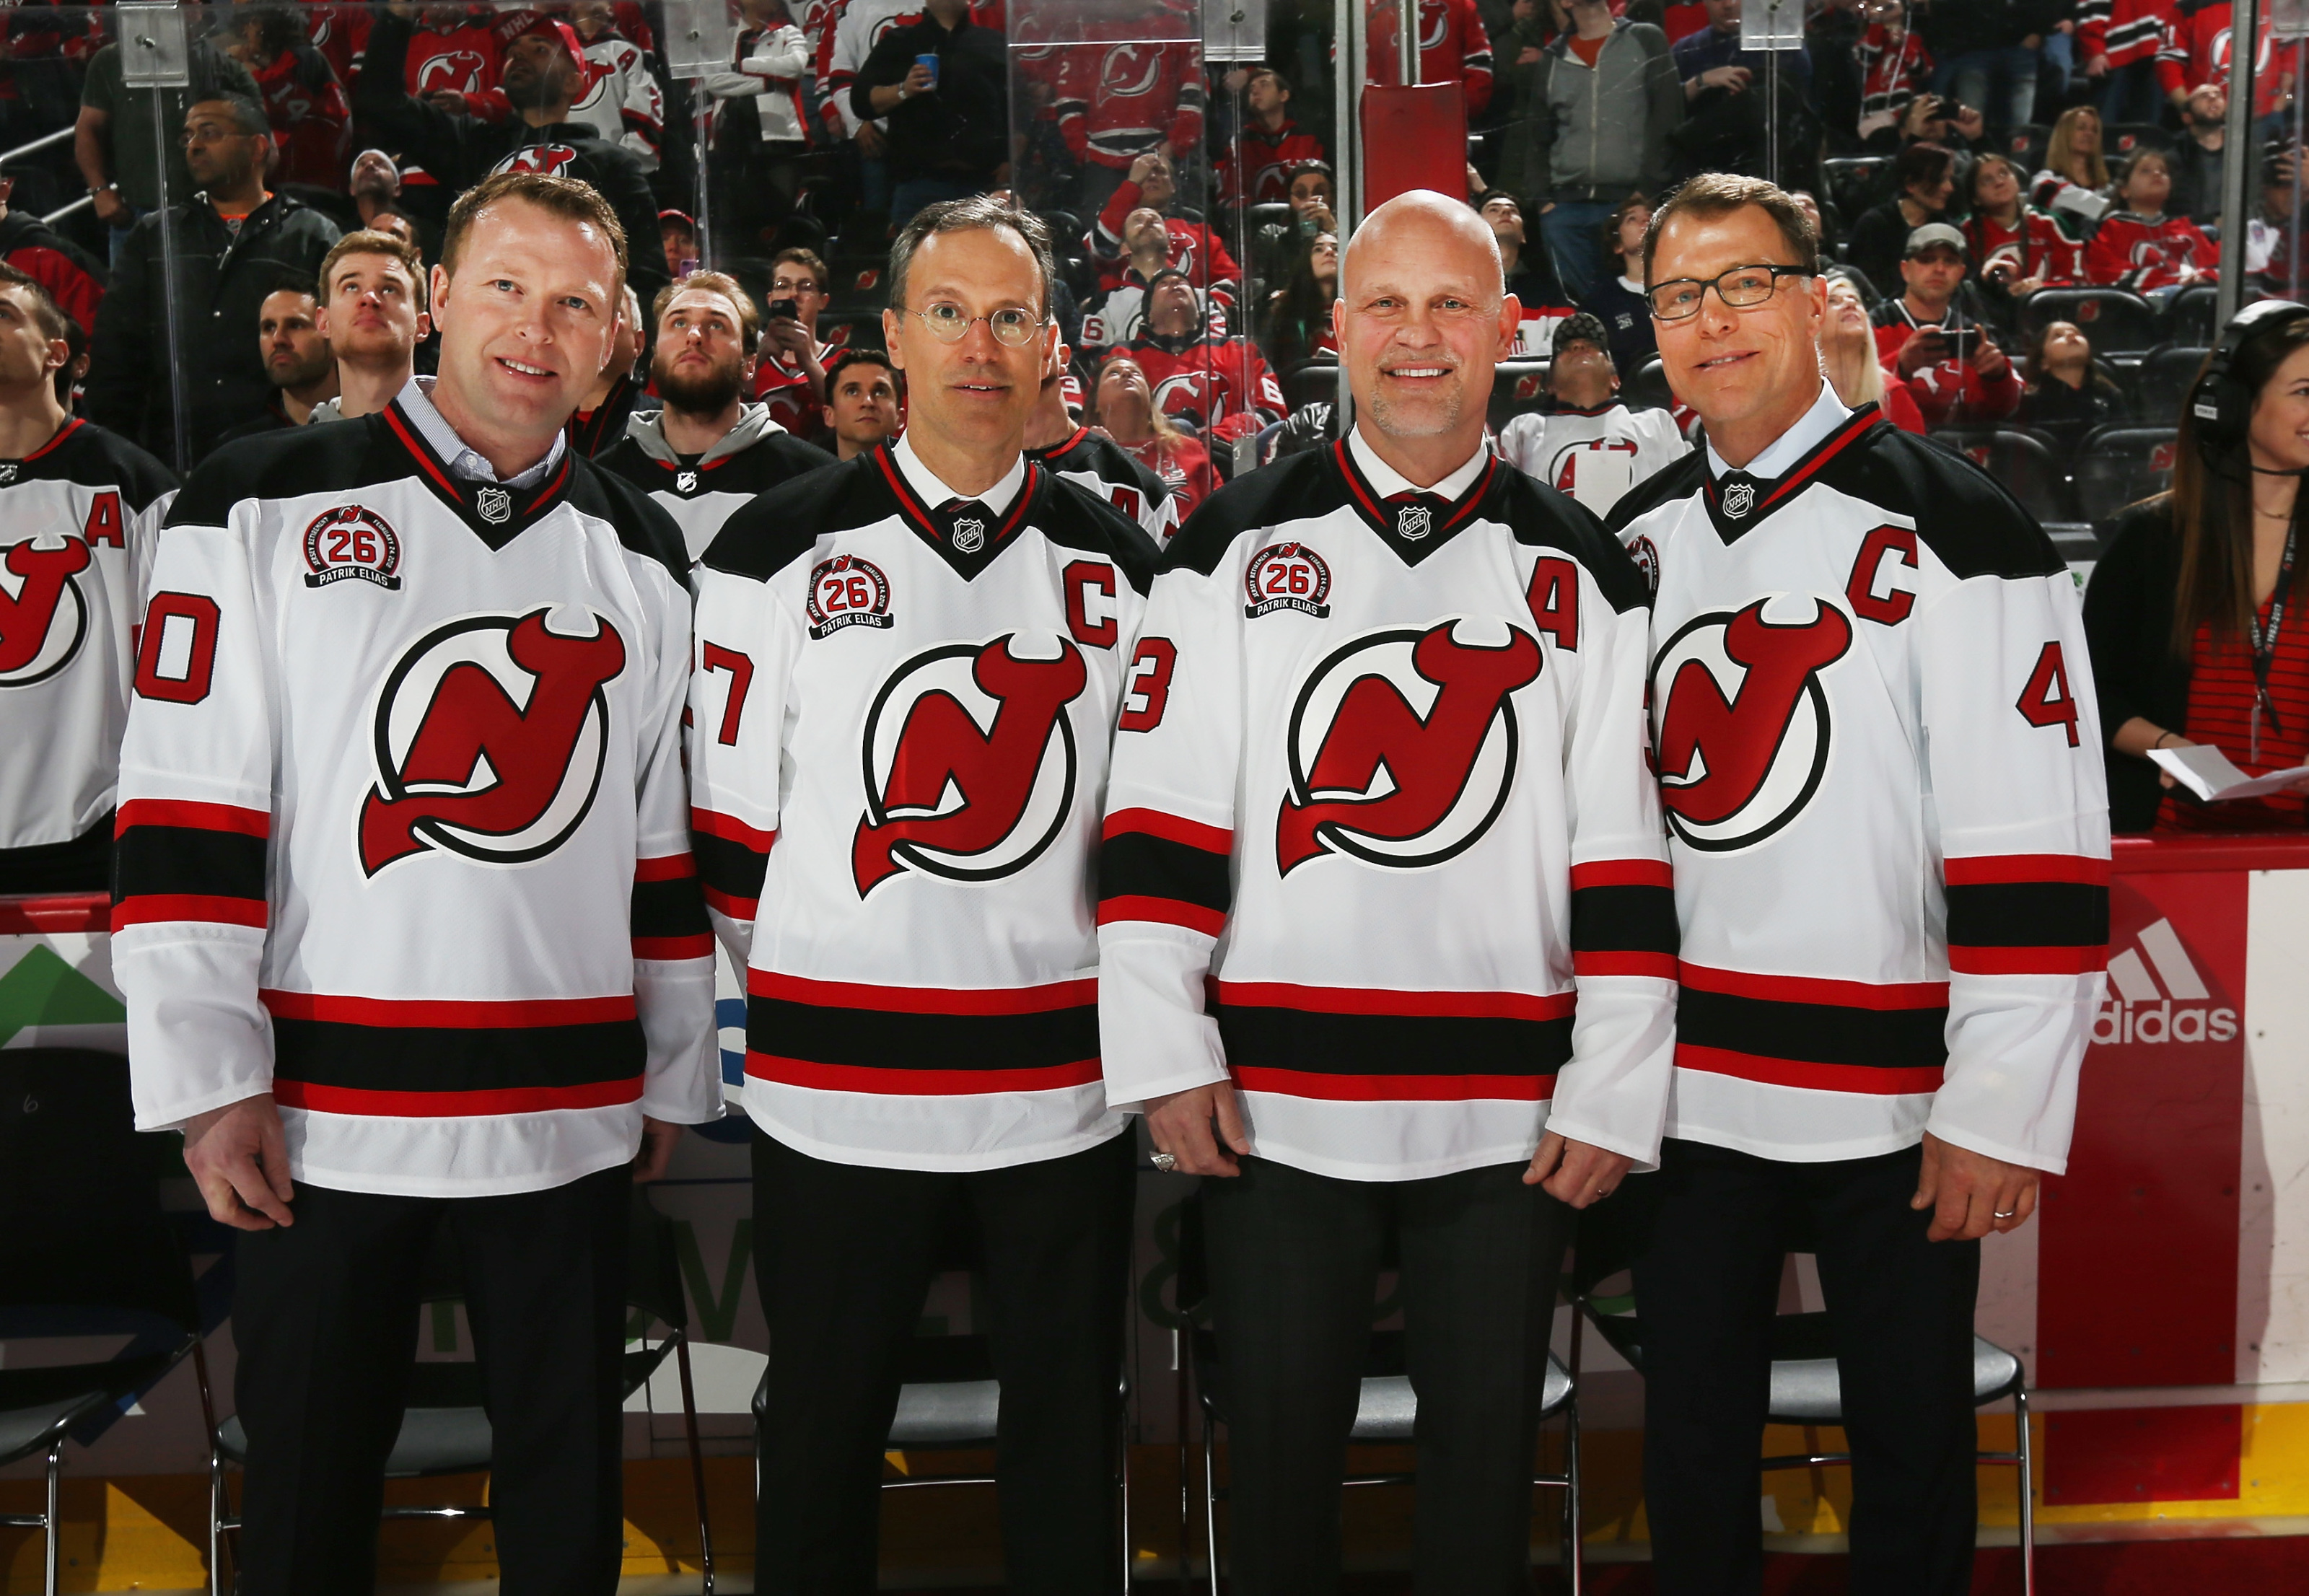 Was this Patrik Elias' final game with the Devils?